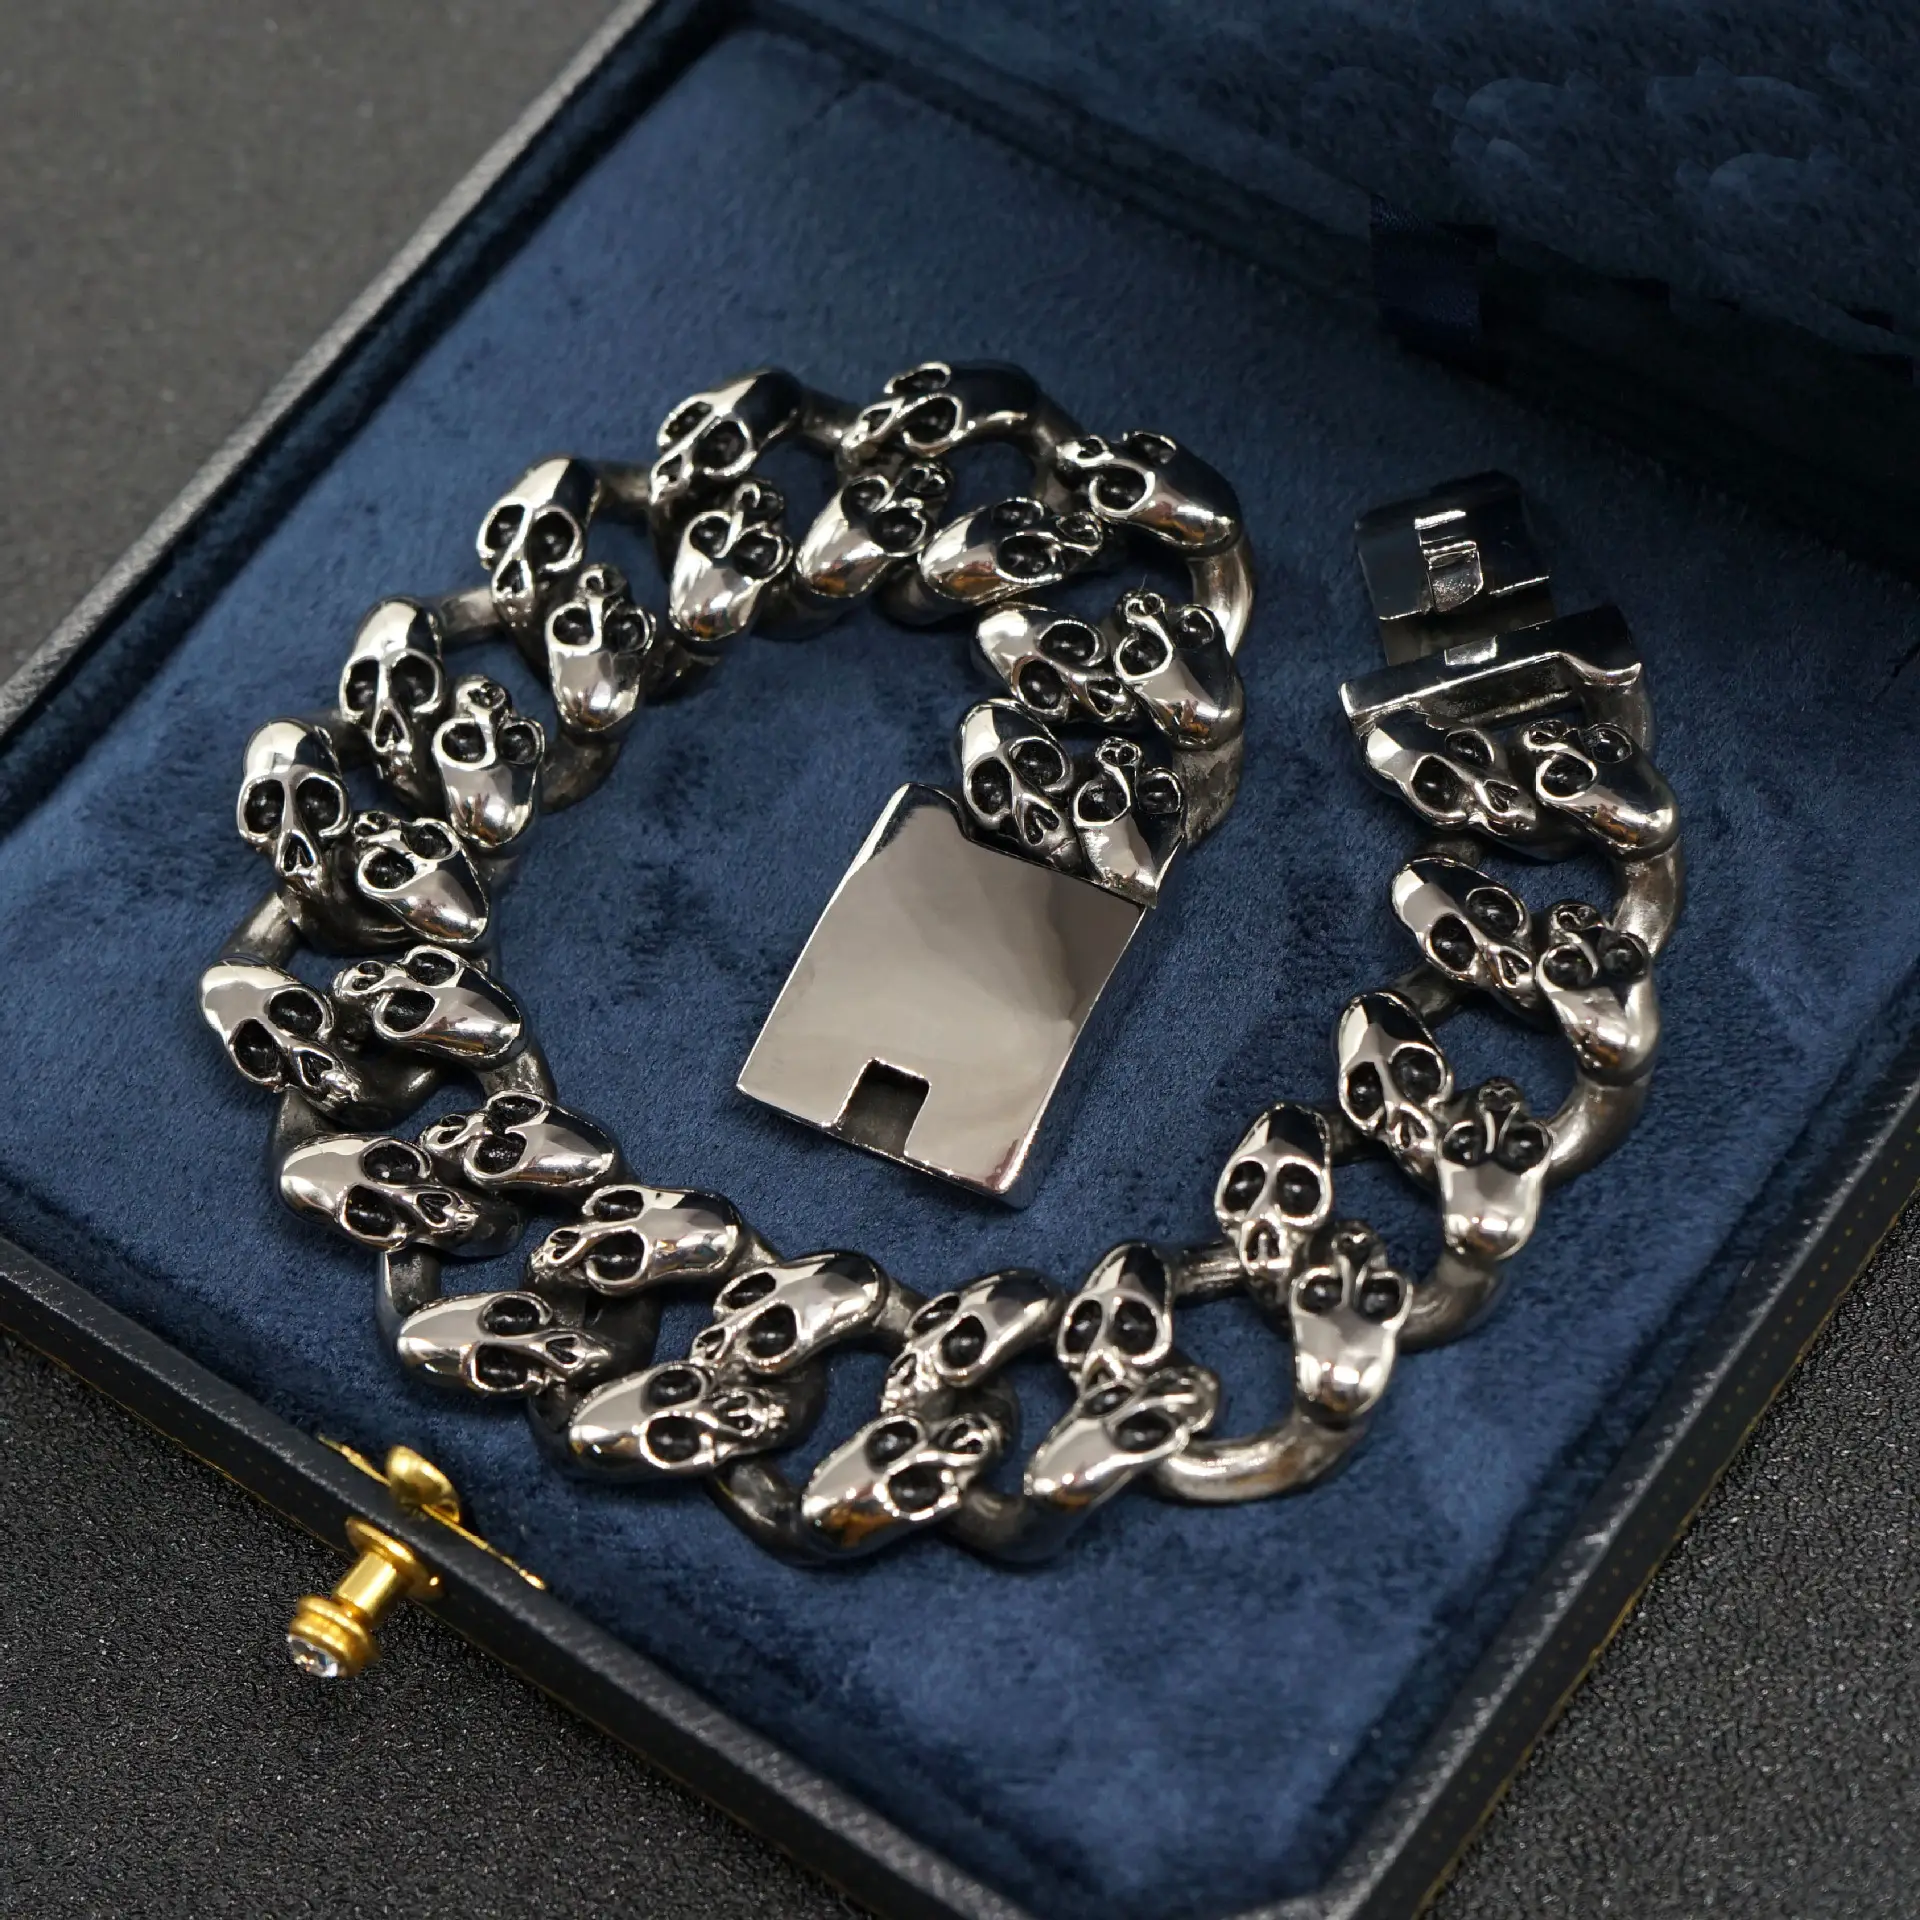 Men's Natural Stone and Diamond Bead Bracelet Stainless Steel Cuff with Skulls Skeleton Punk Design and Number Pattern